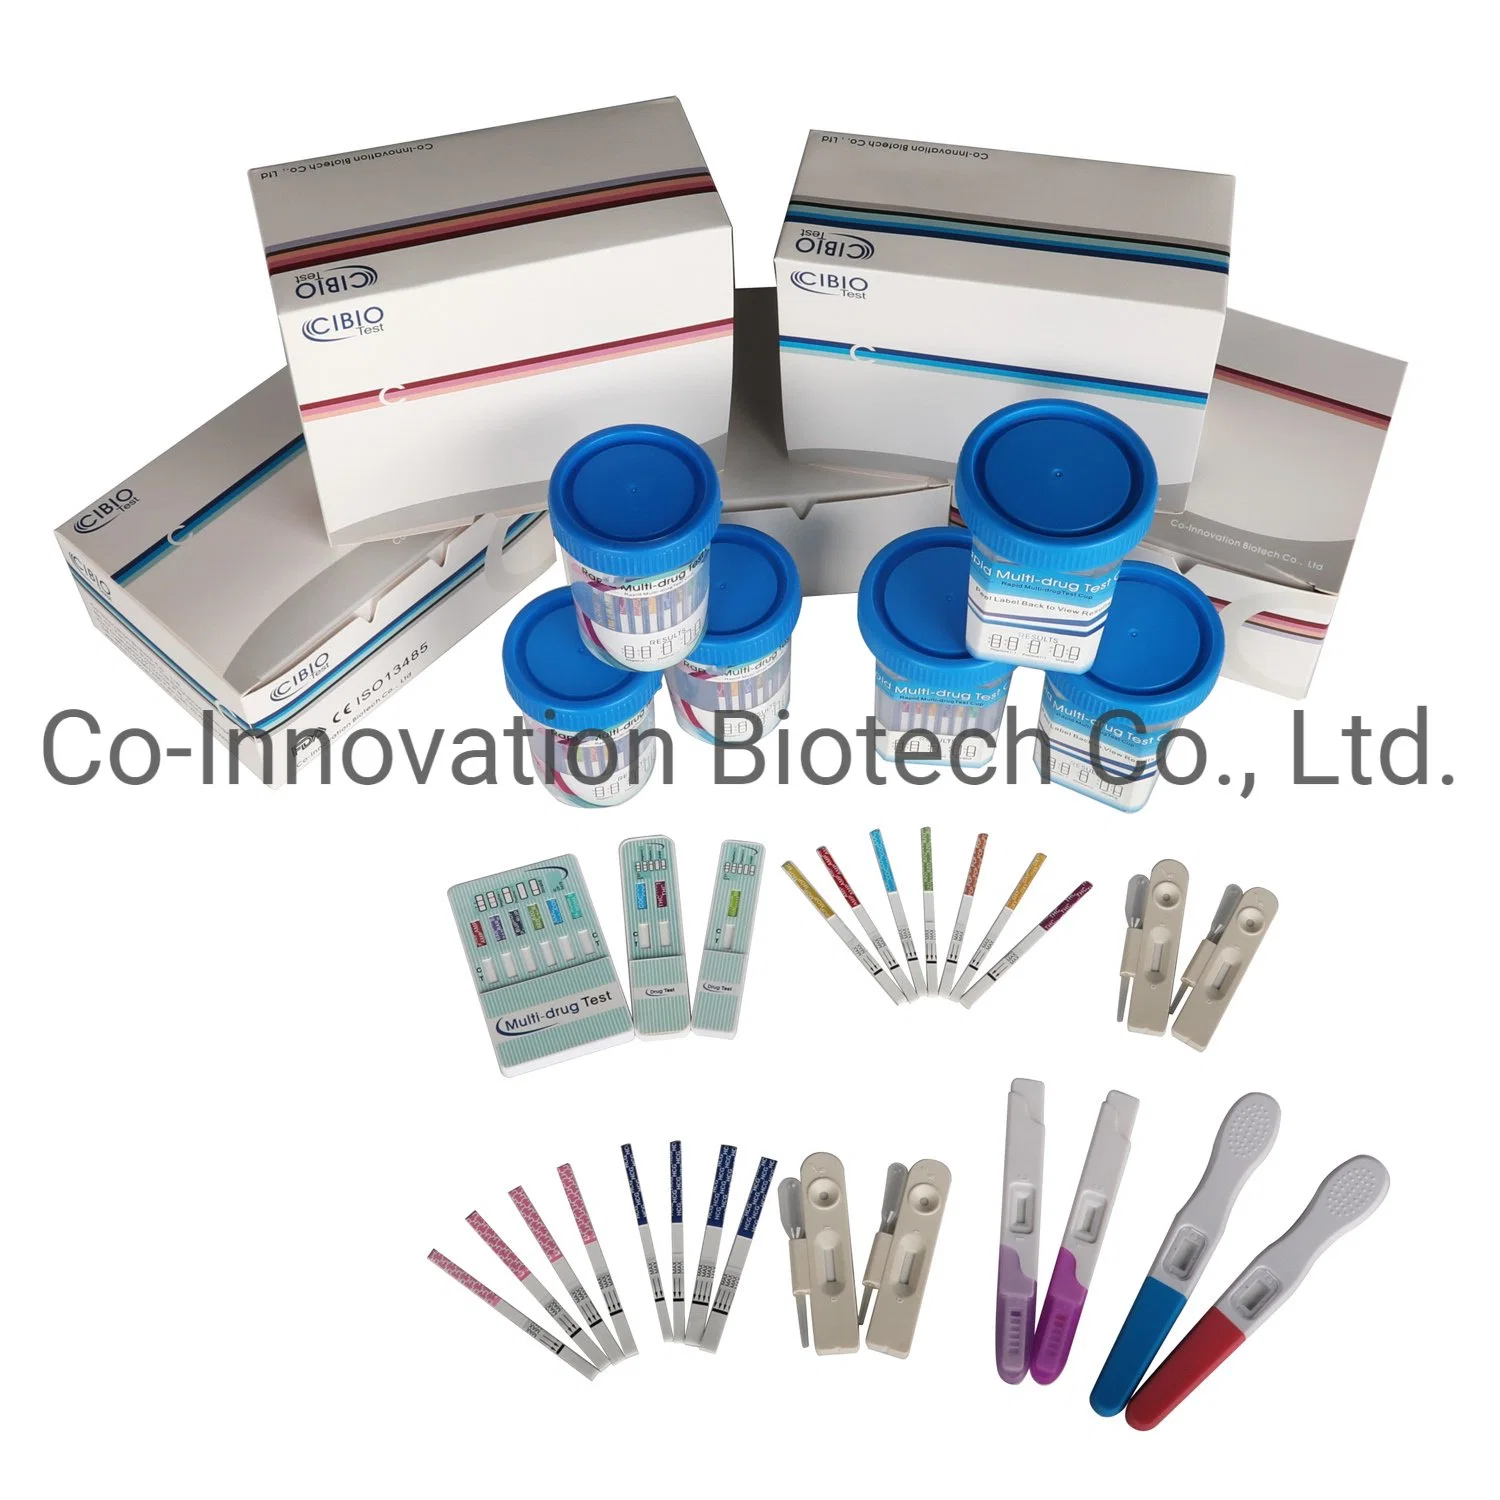 Wholesale/Supplier Colloidal Gold in Vitro Diagnostic Products with Bulk Pack